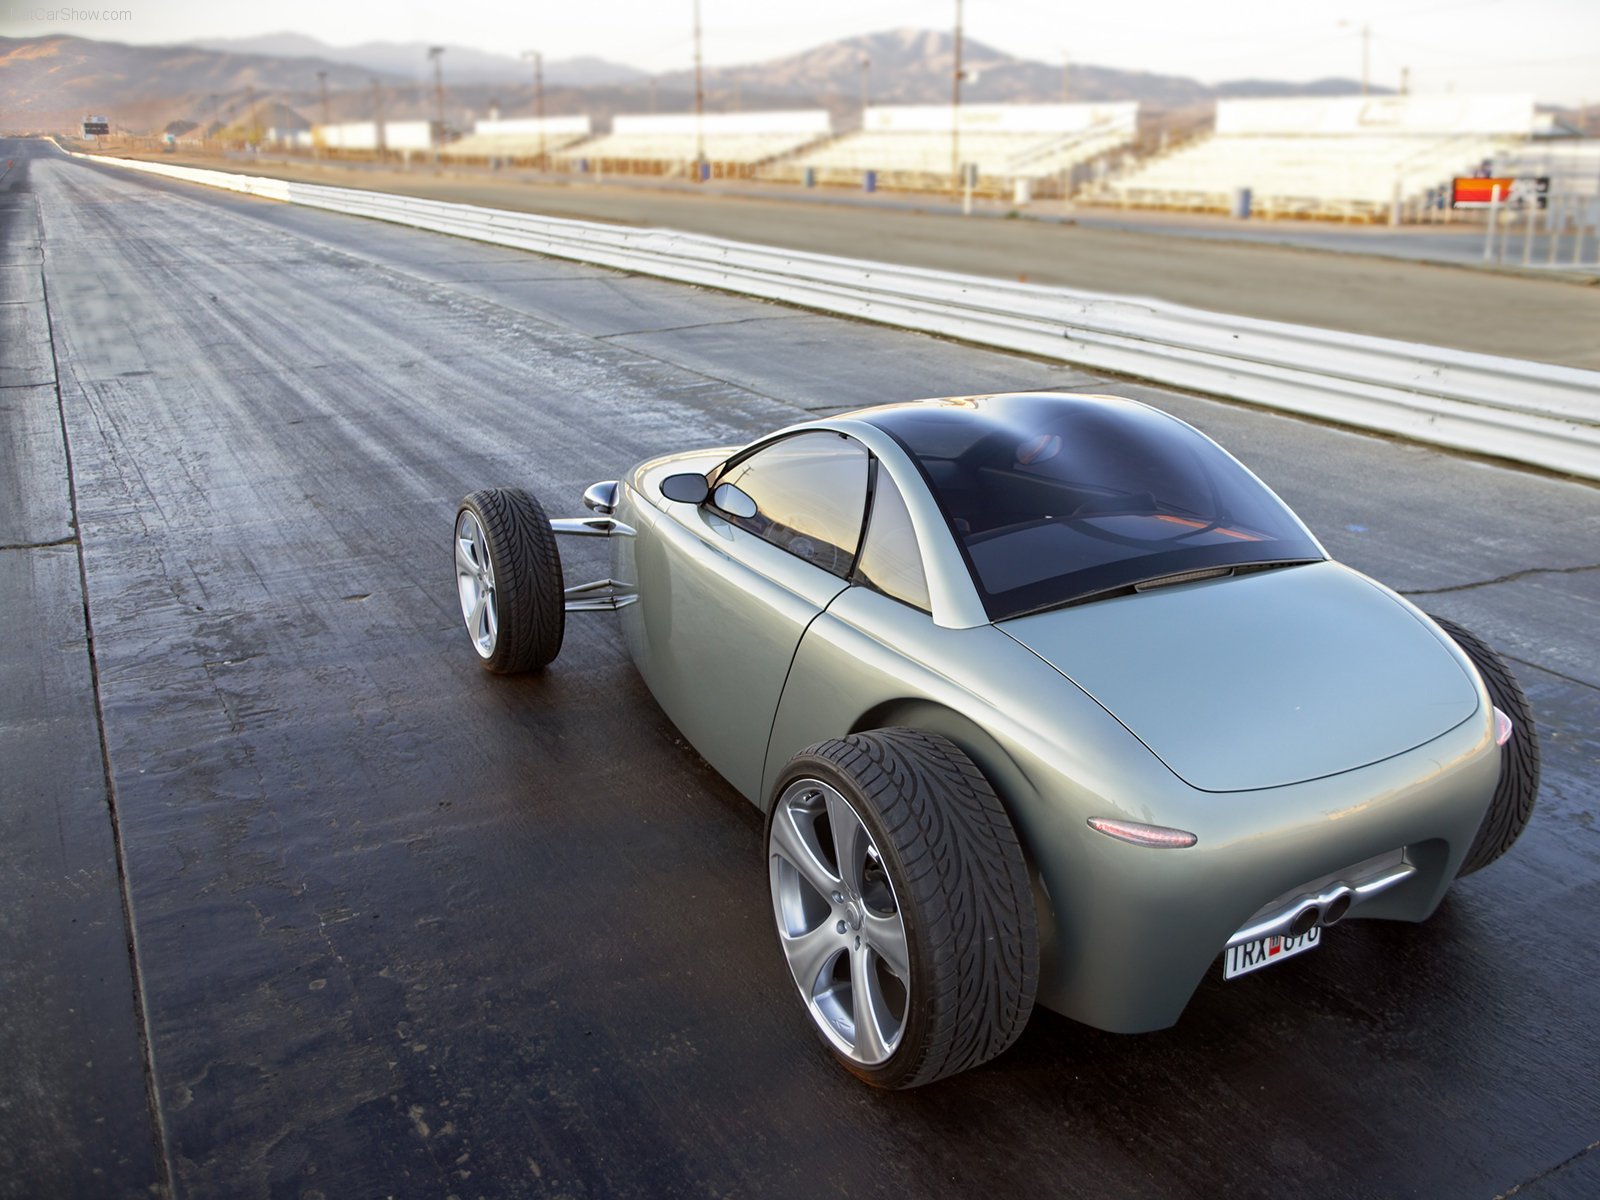 concept, Roadster, Supercars, Volvo, T6, Cars, 2005 Wallpaper